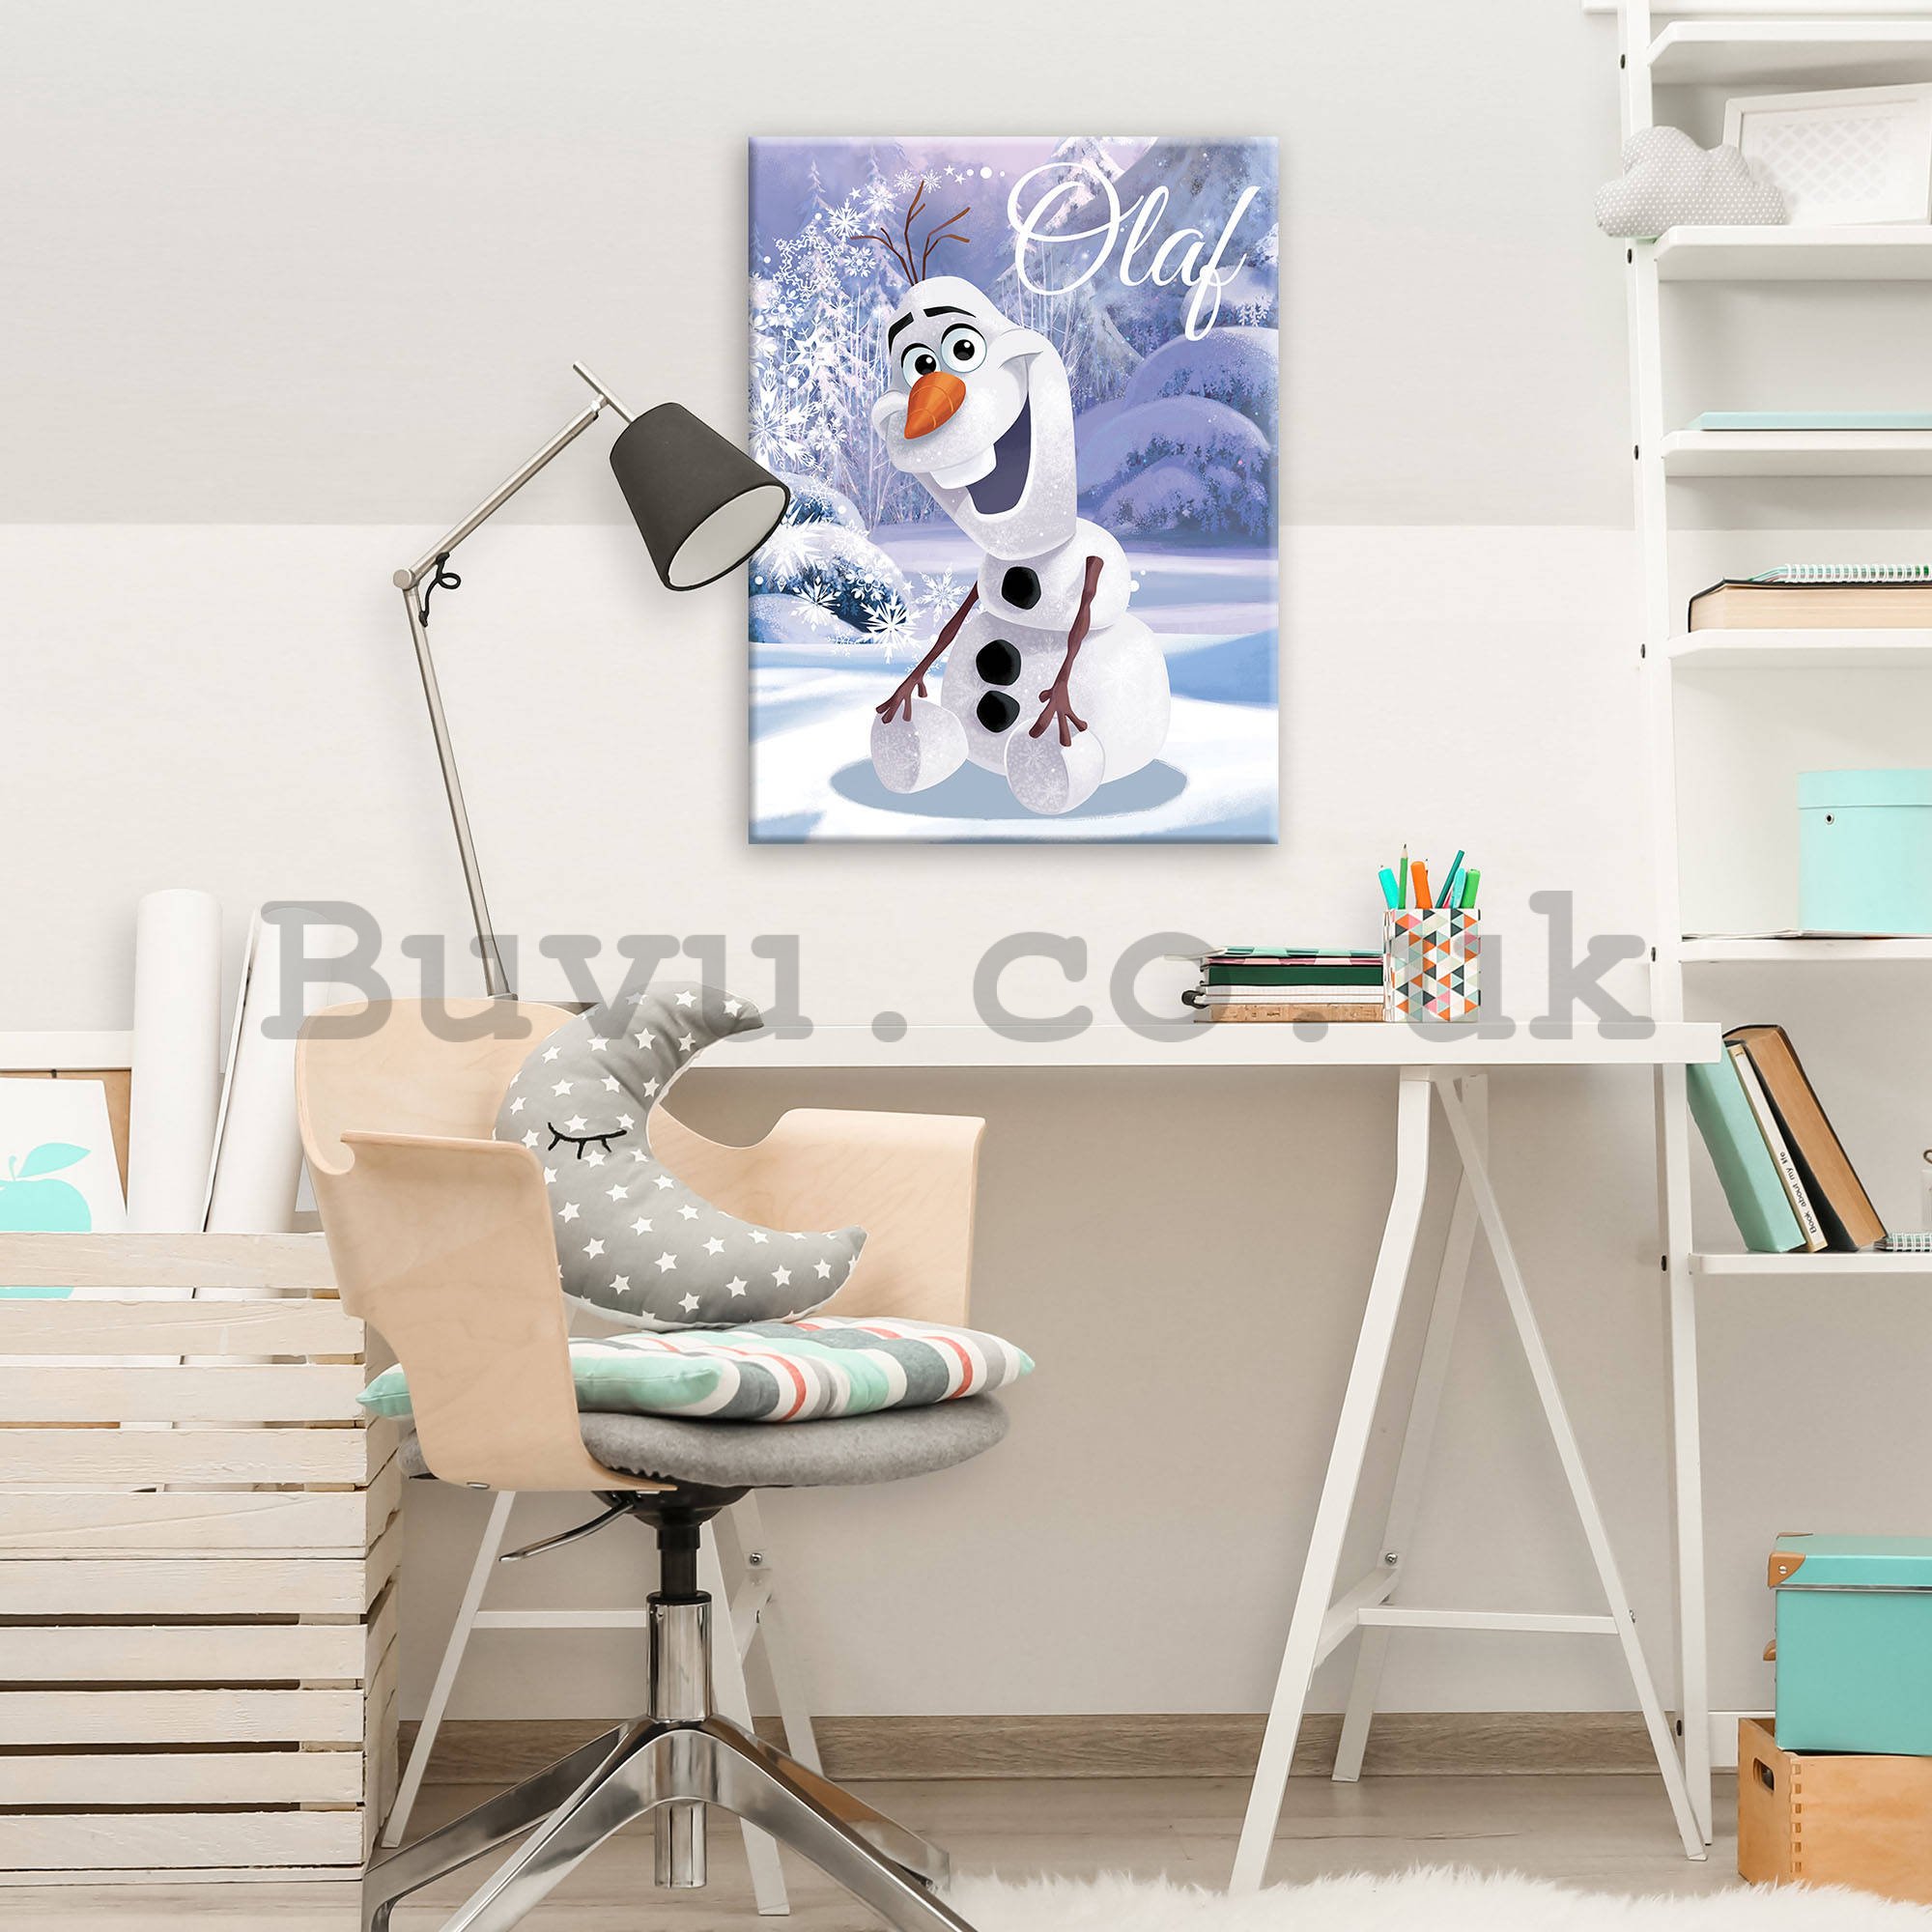 Painting on canvas: Frozen (Olaf) - 60x80 cm